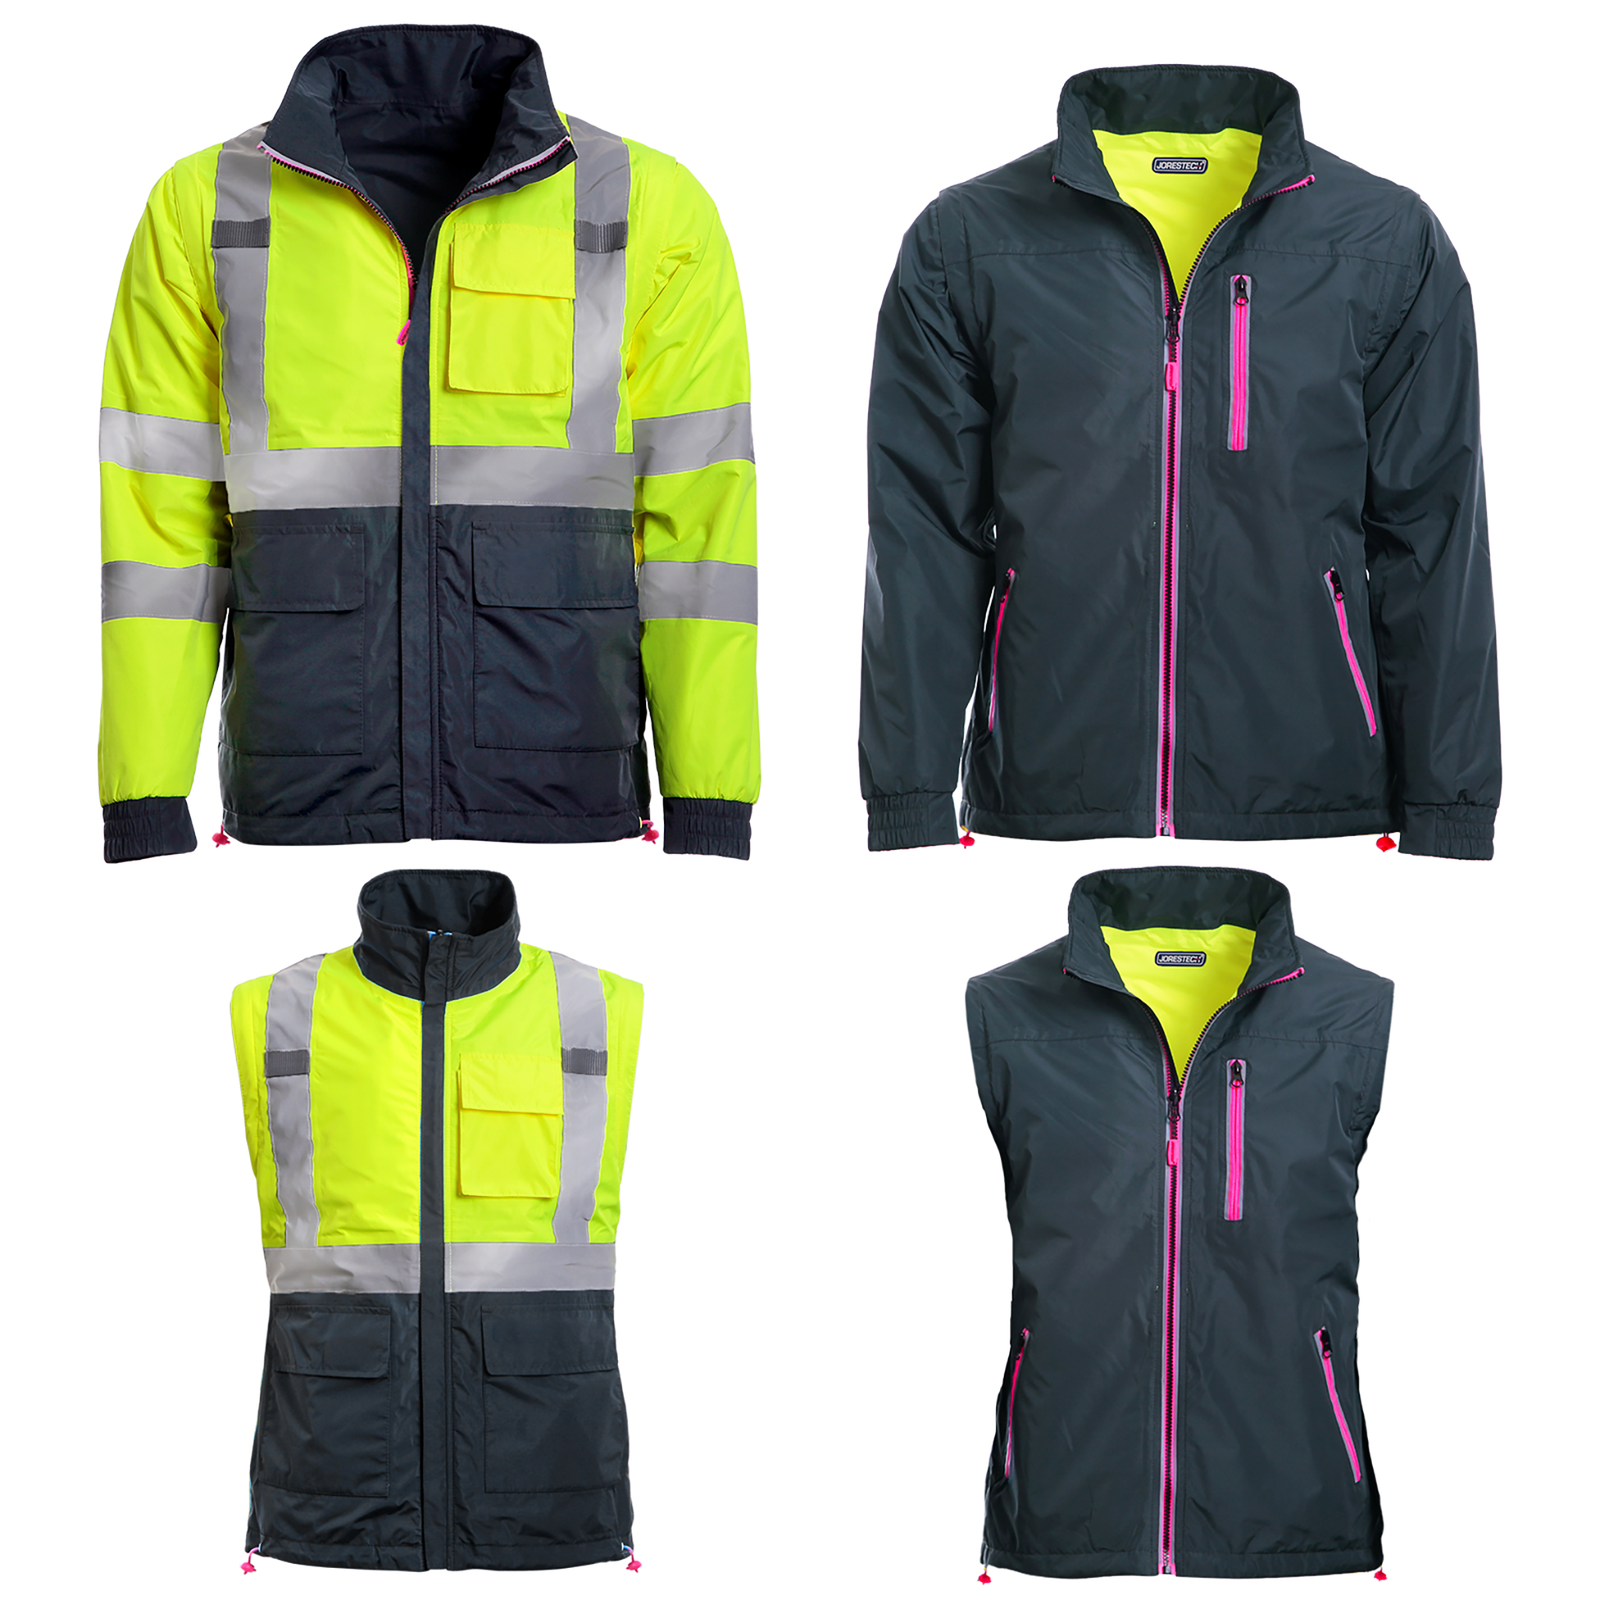 4 different looks are shown: 1 a reflective yellow JORESTECH safety jacket. 2 a reflective yellow safety vest. 3 a non reflective jacket with dark gray and pink details. 4 a no reflective vest with dark gray and pink details.